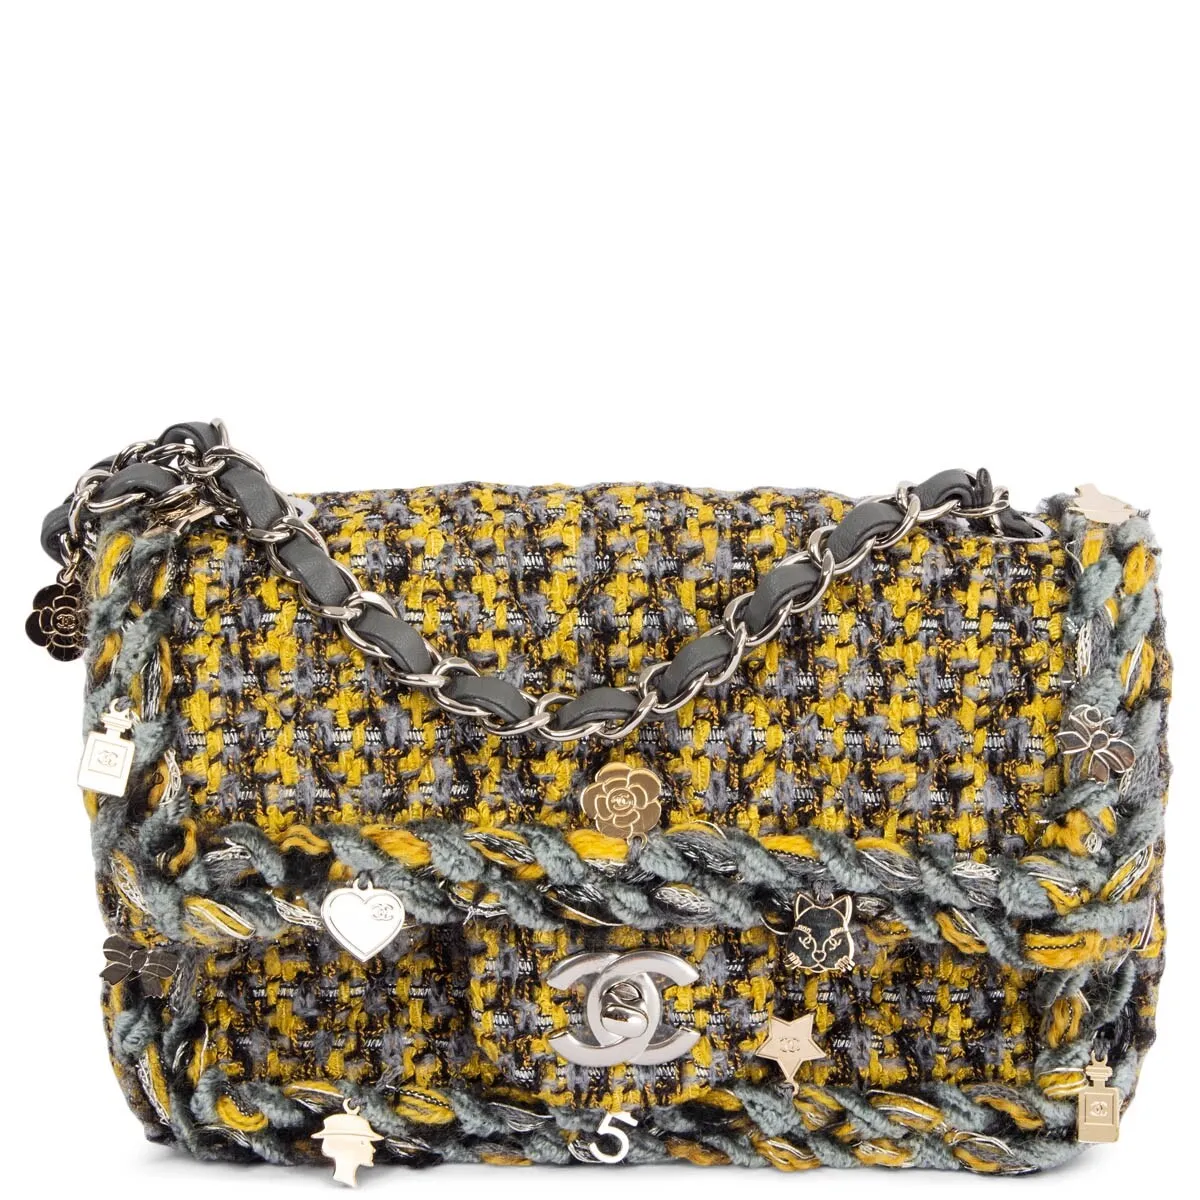 66979 auth CHANEL yellow & grey 2017 CHARMS TWEED SMALL FLAP Shoulder Bag